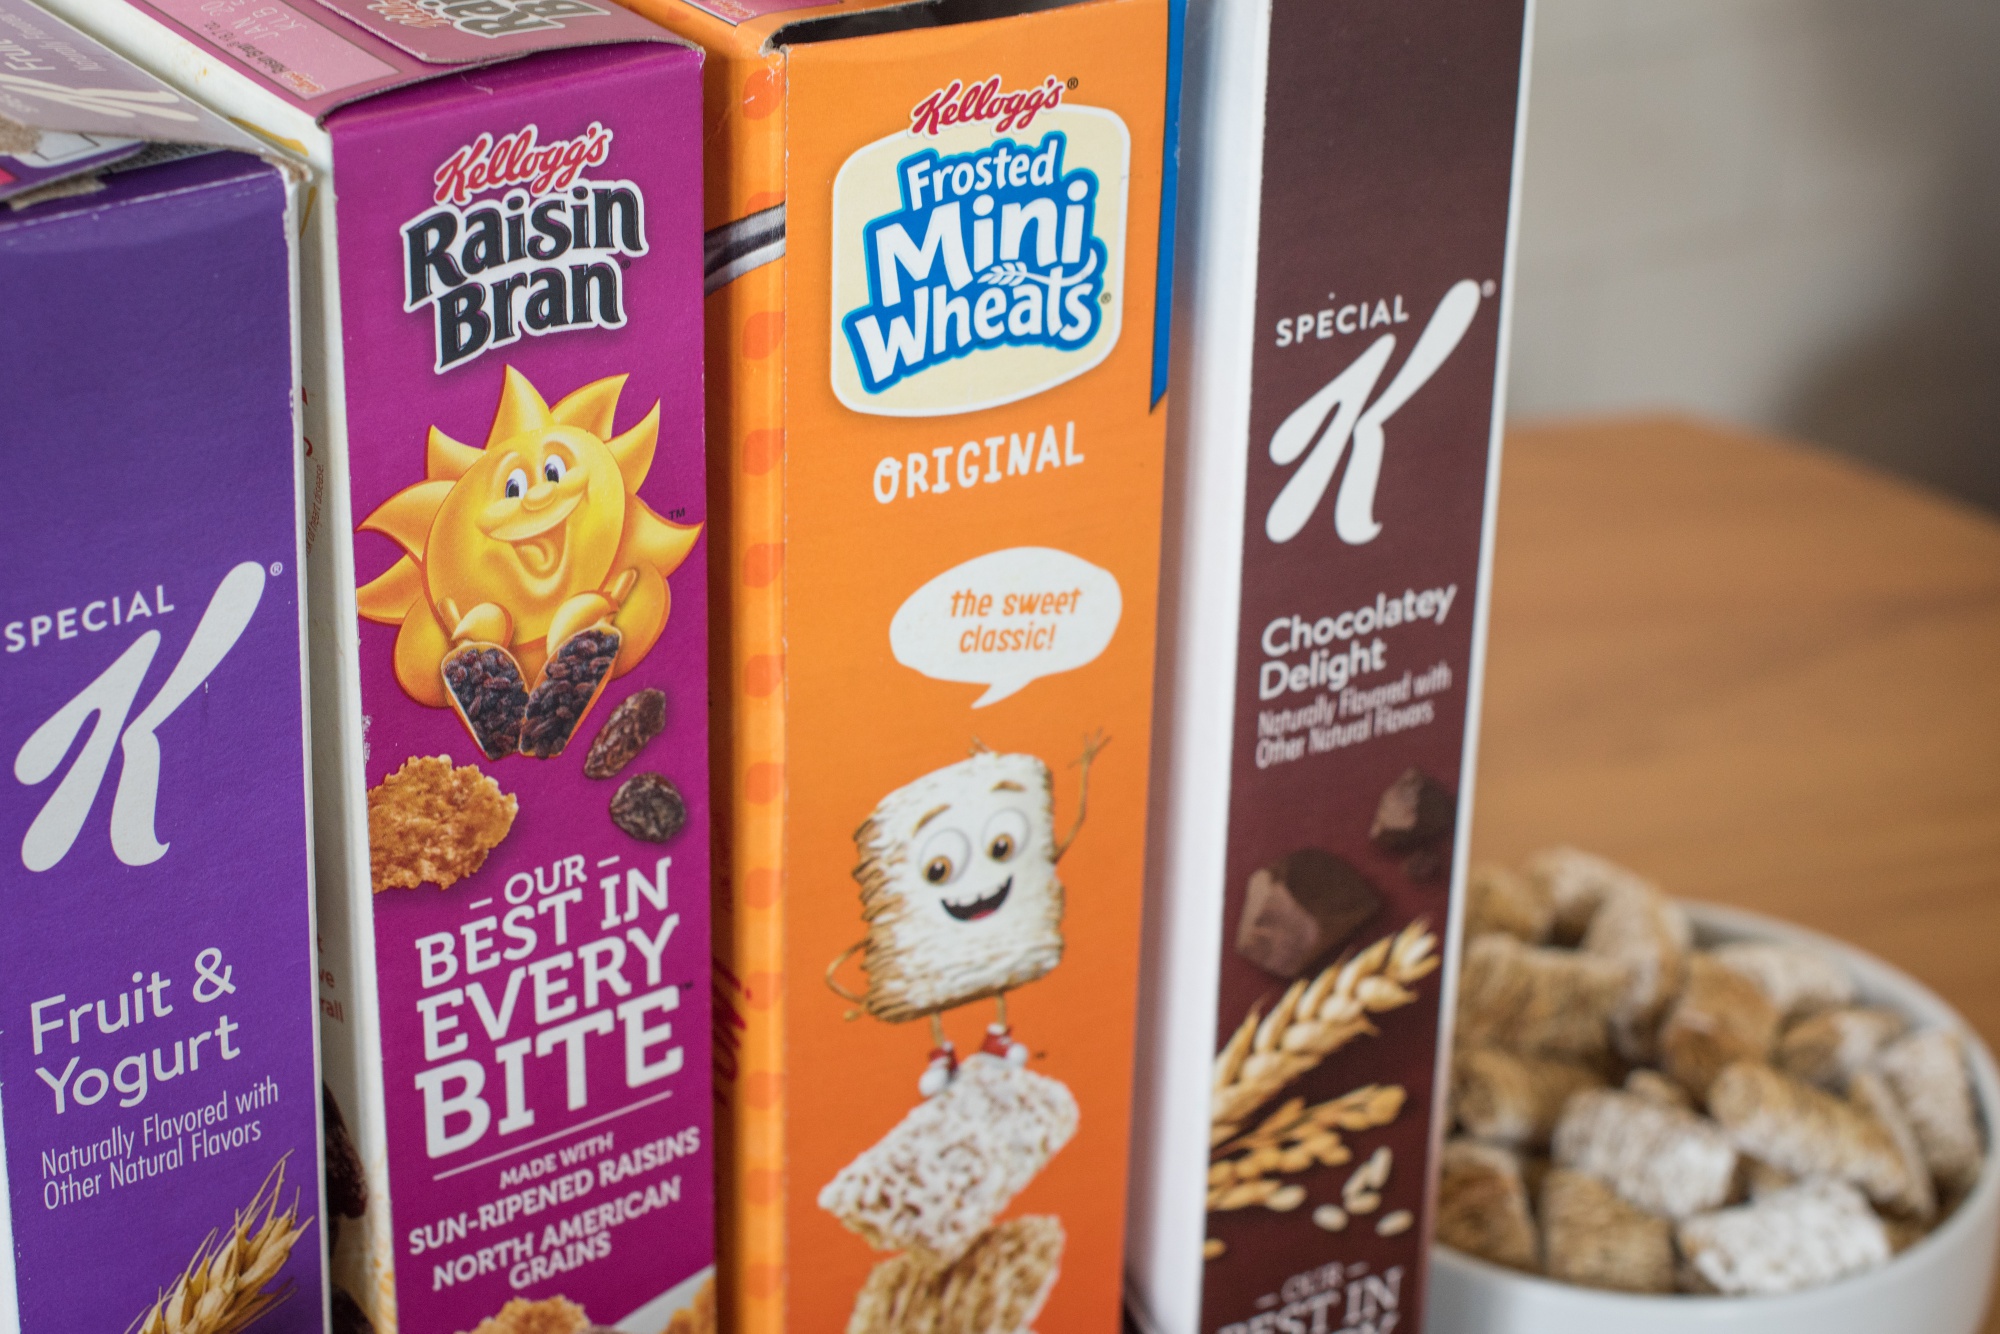 Kellogg's now produces ONE MILLION boxes of cereal a day